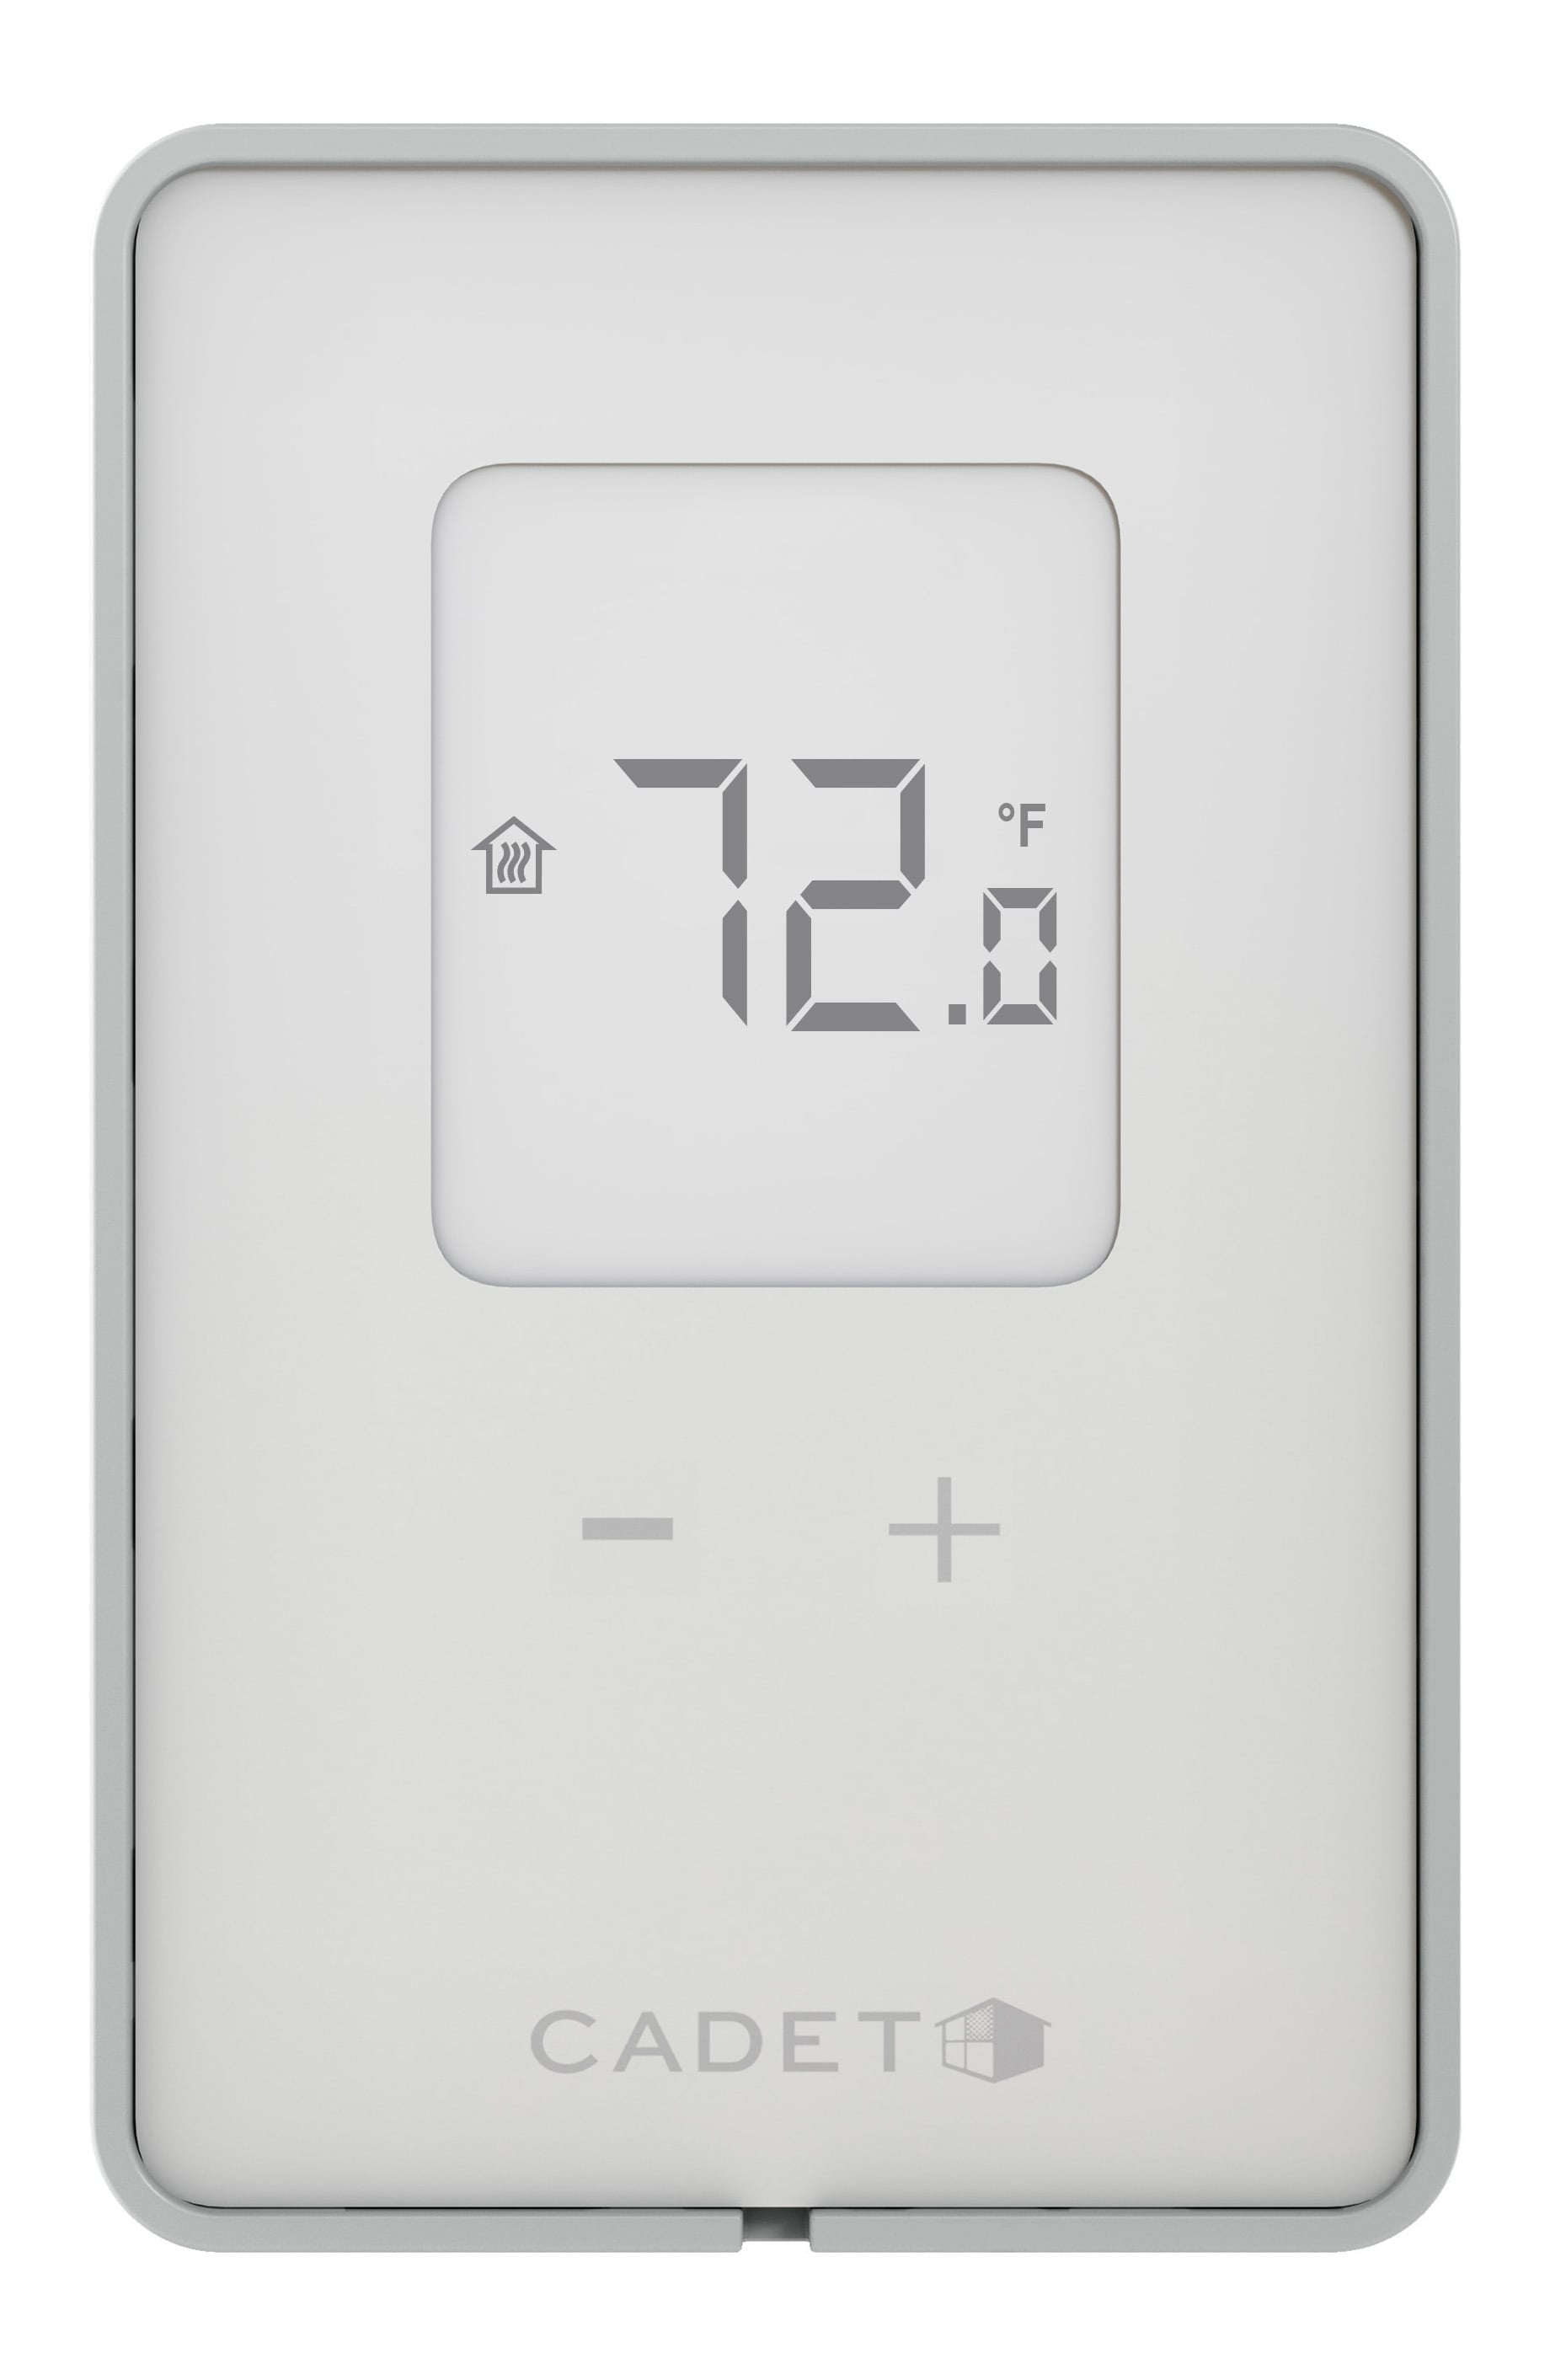 Honeywell CW200A hiver Watchman 120 V Wall-Mount non-Thermostat programmable 